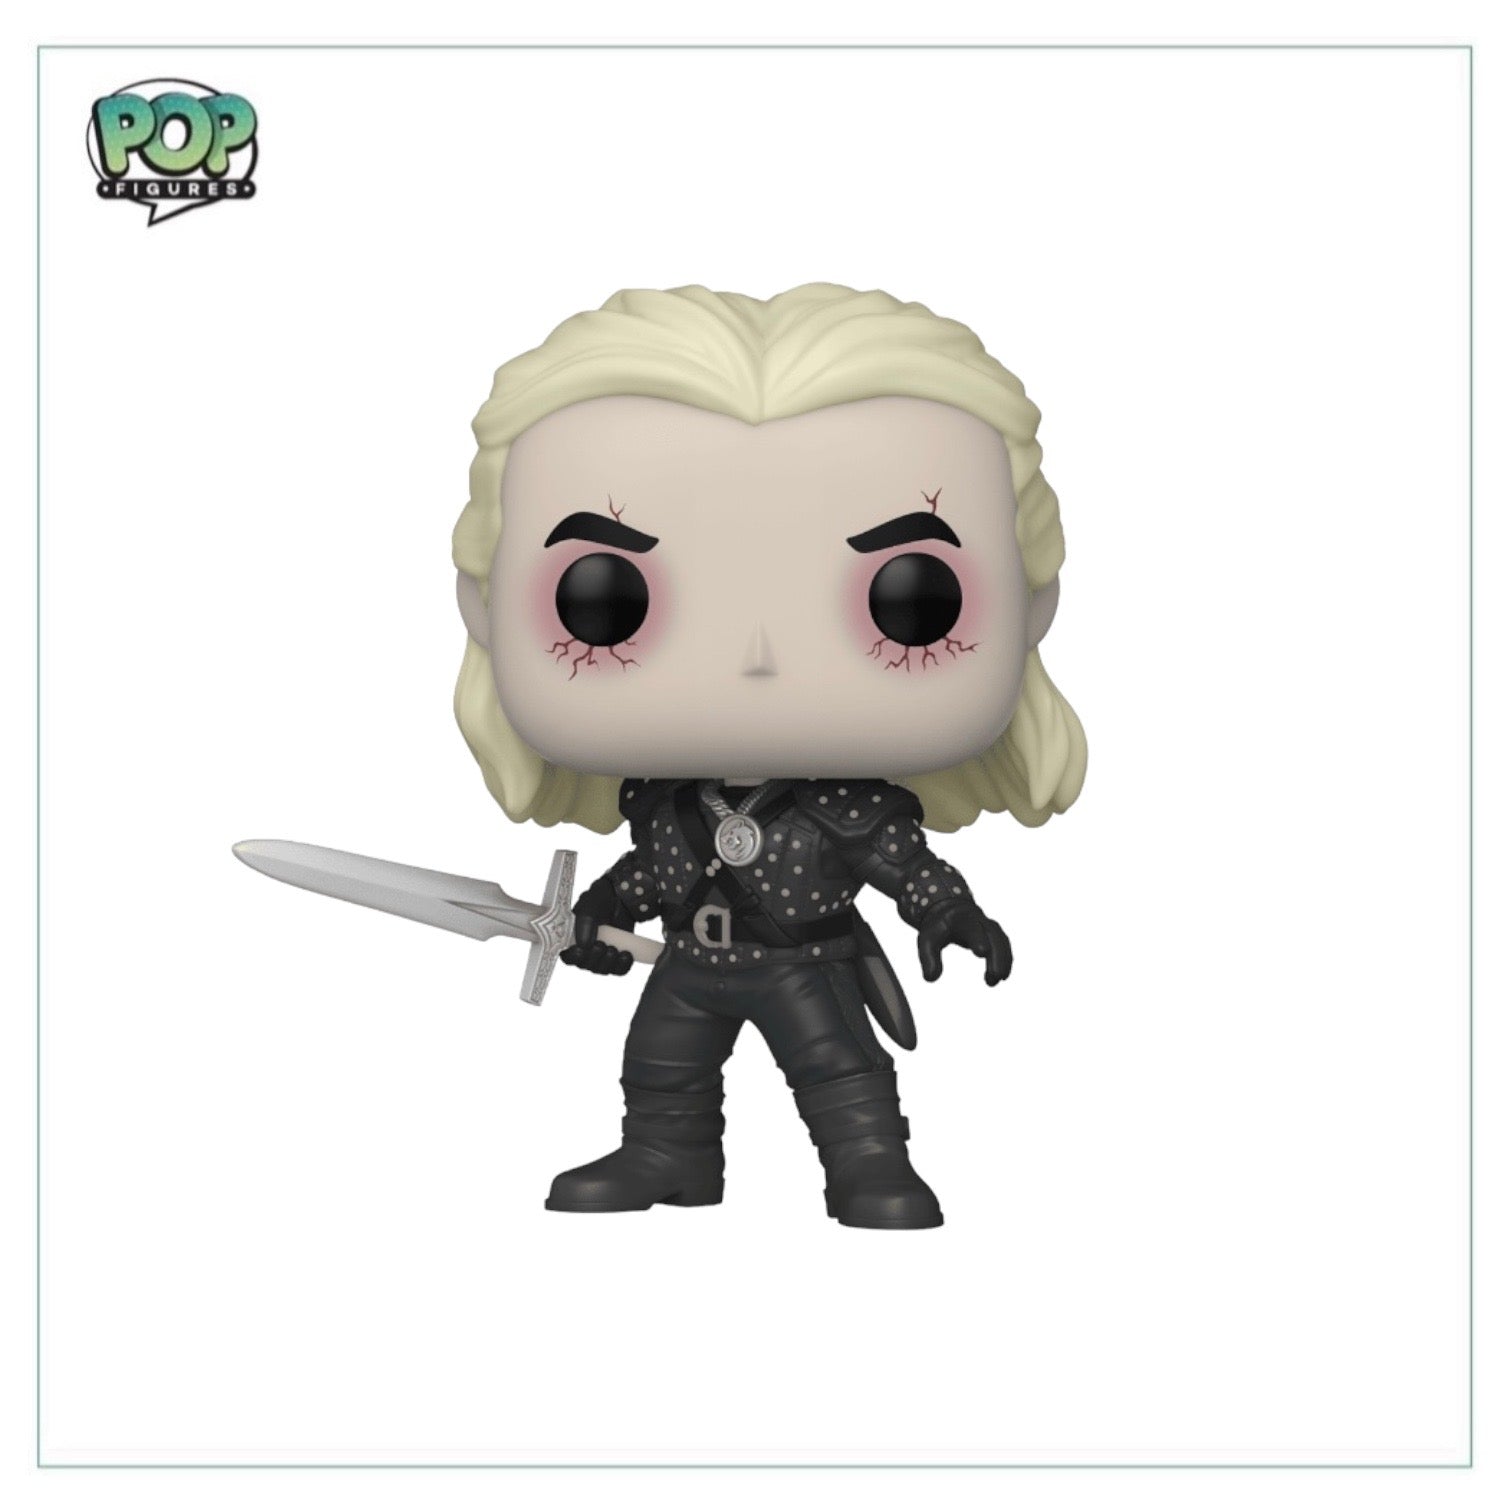 Geralt #1192 (Chase) Funko Pop! - The Witcher